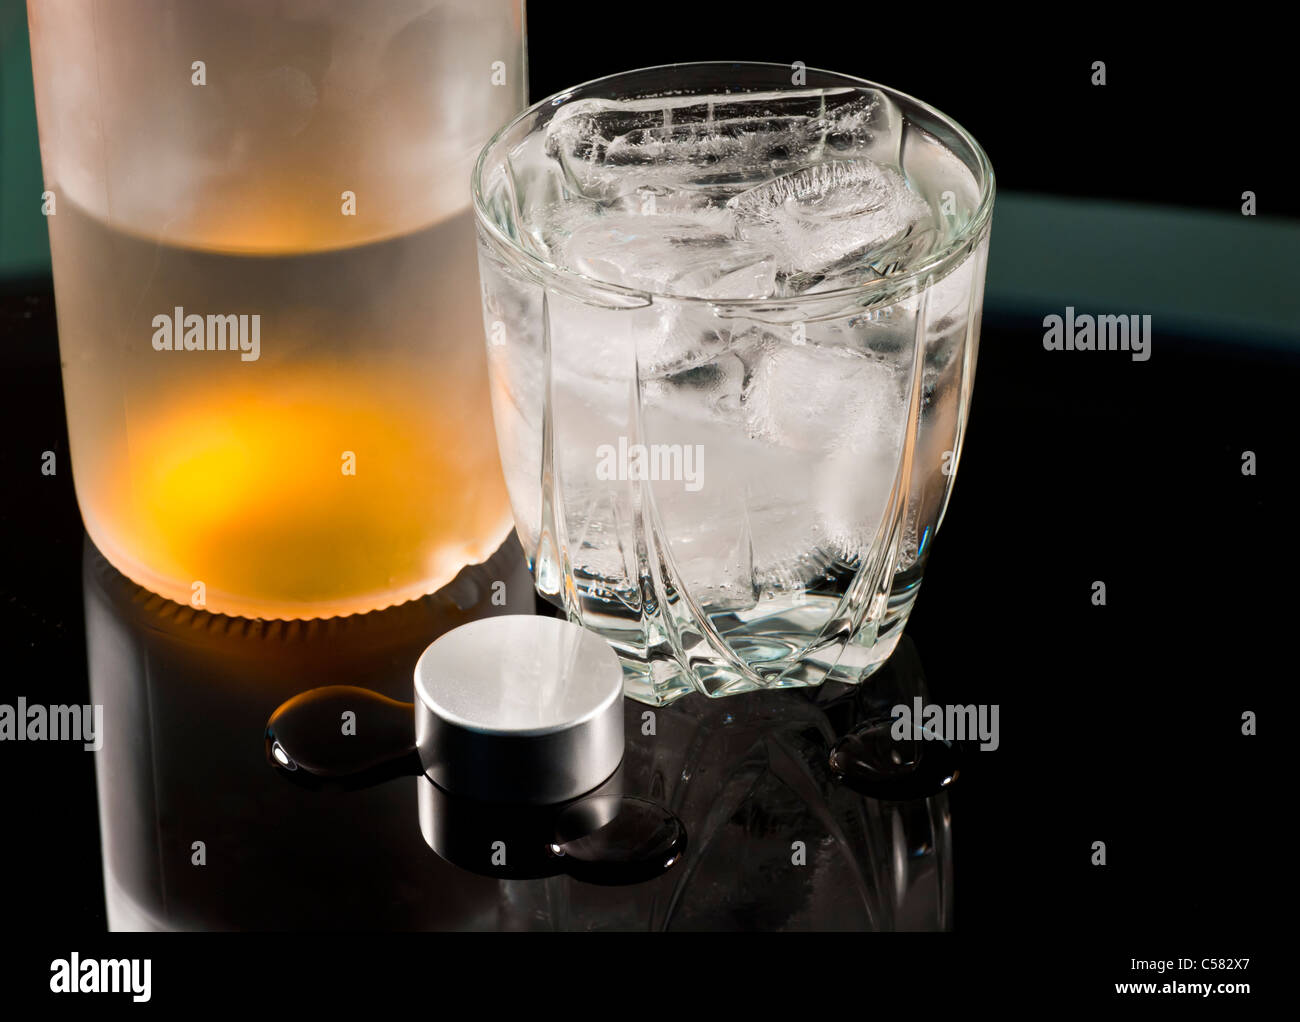 Vodka on the rocks with reflection. Stock Photo